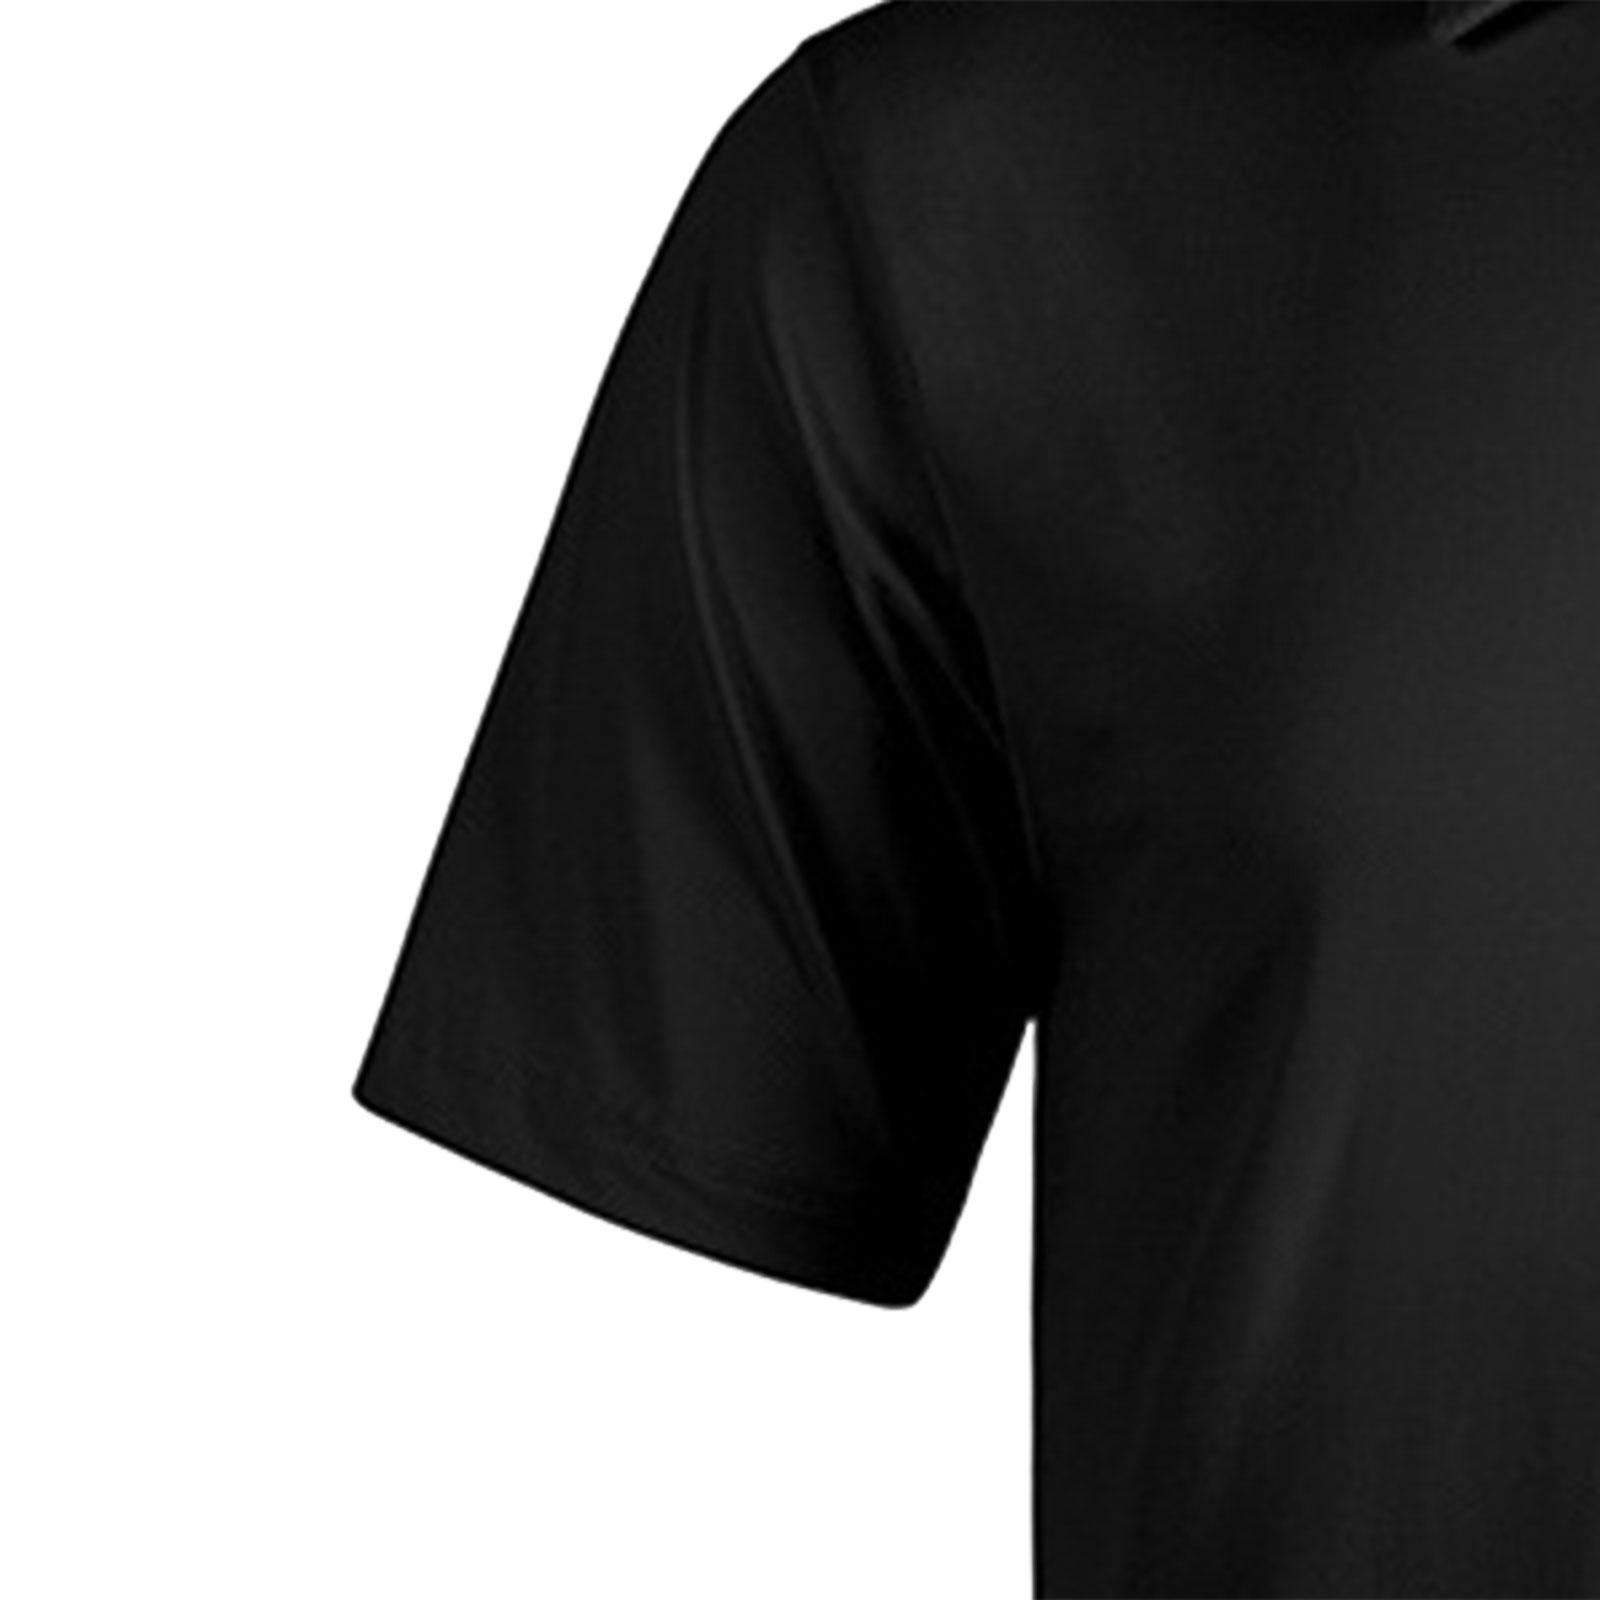 Mens Short Sleeve T Shirt Casual Tee Shirt for Business Hiking Daily Leisure 3XL Black